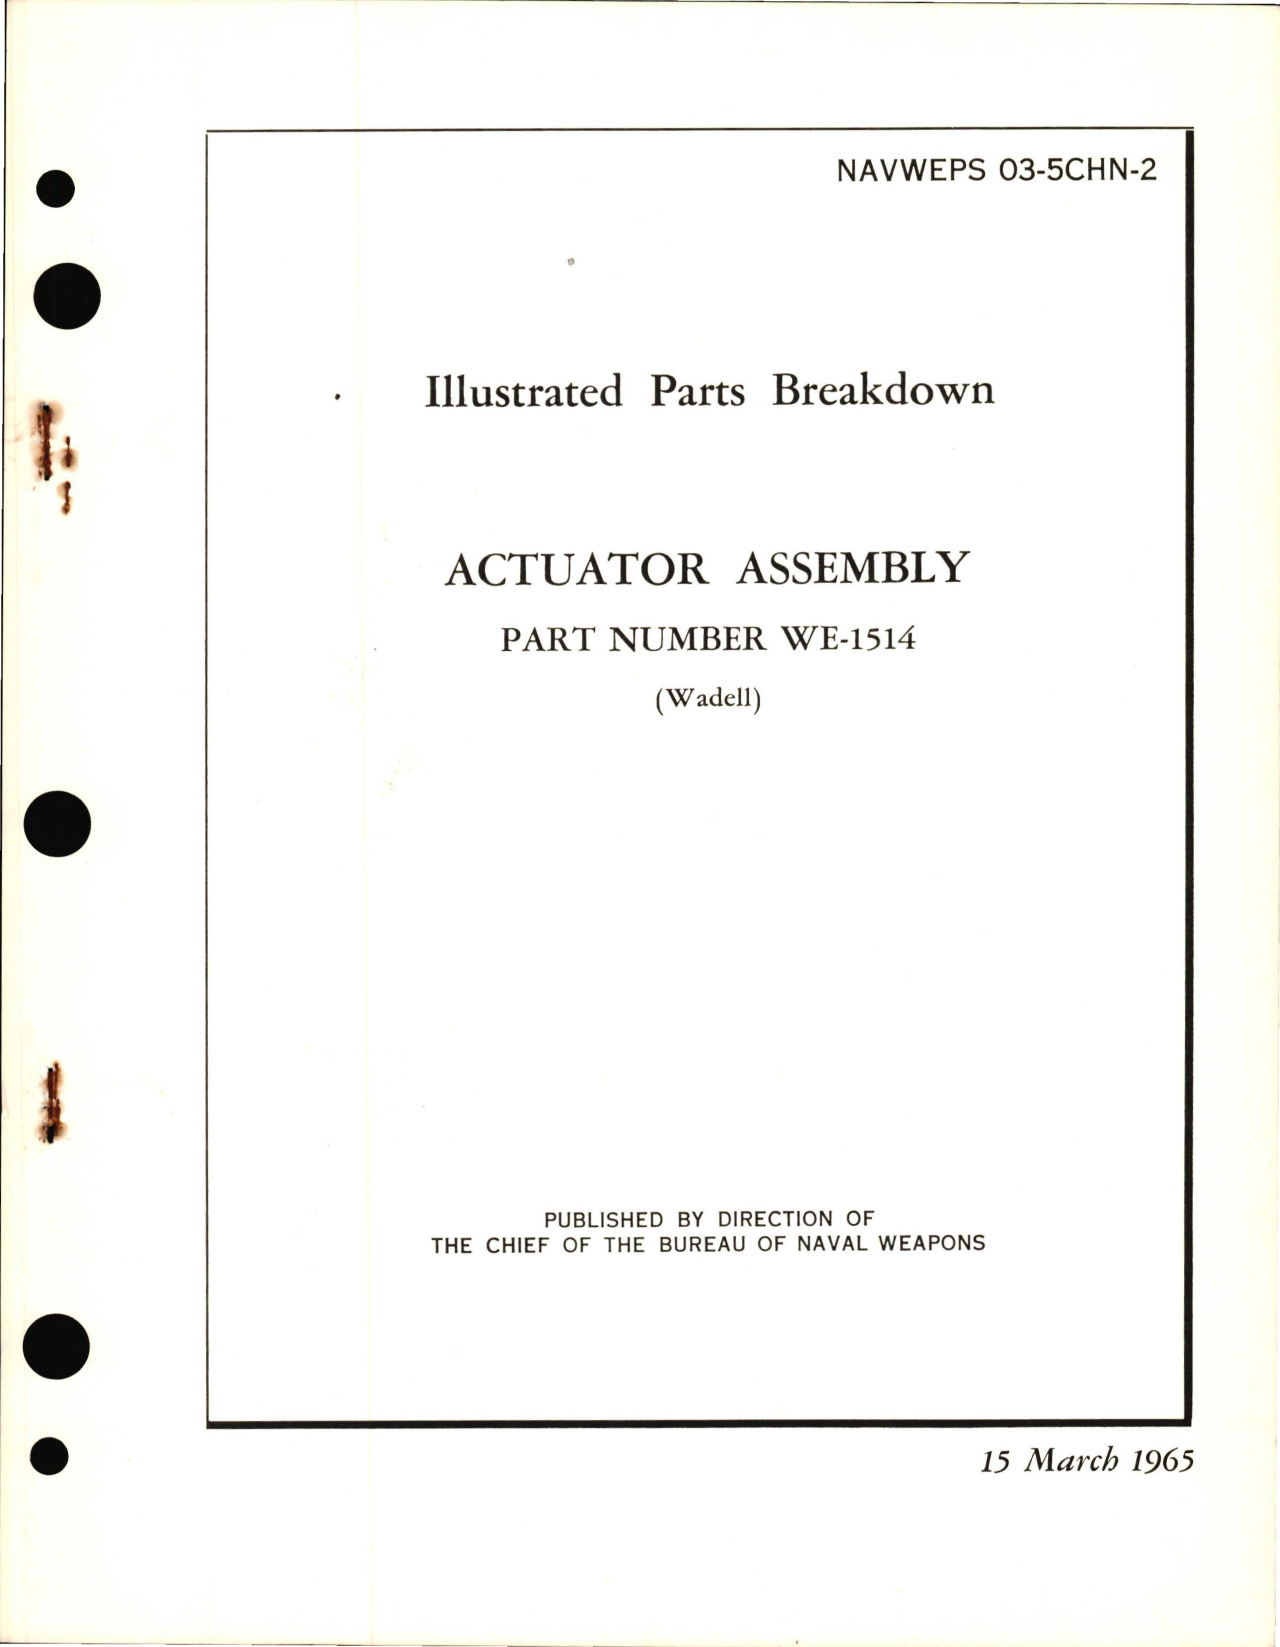 Sample page 1 from AirCorps Library document: Illustrated Parts Breakdown for Actuator Assembly WE-1514